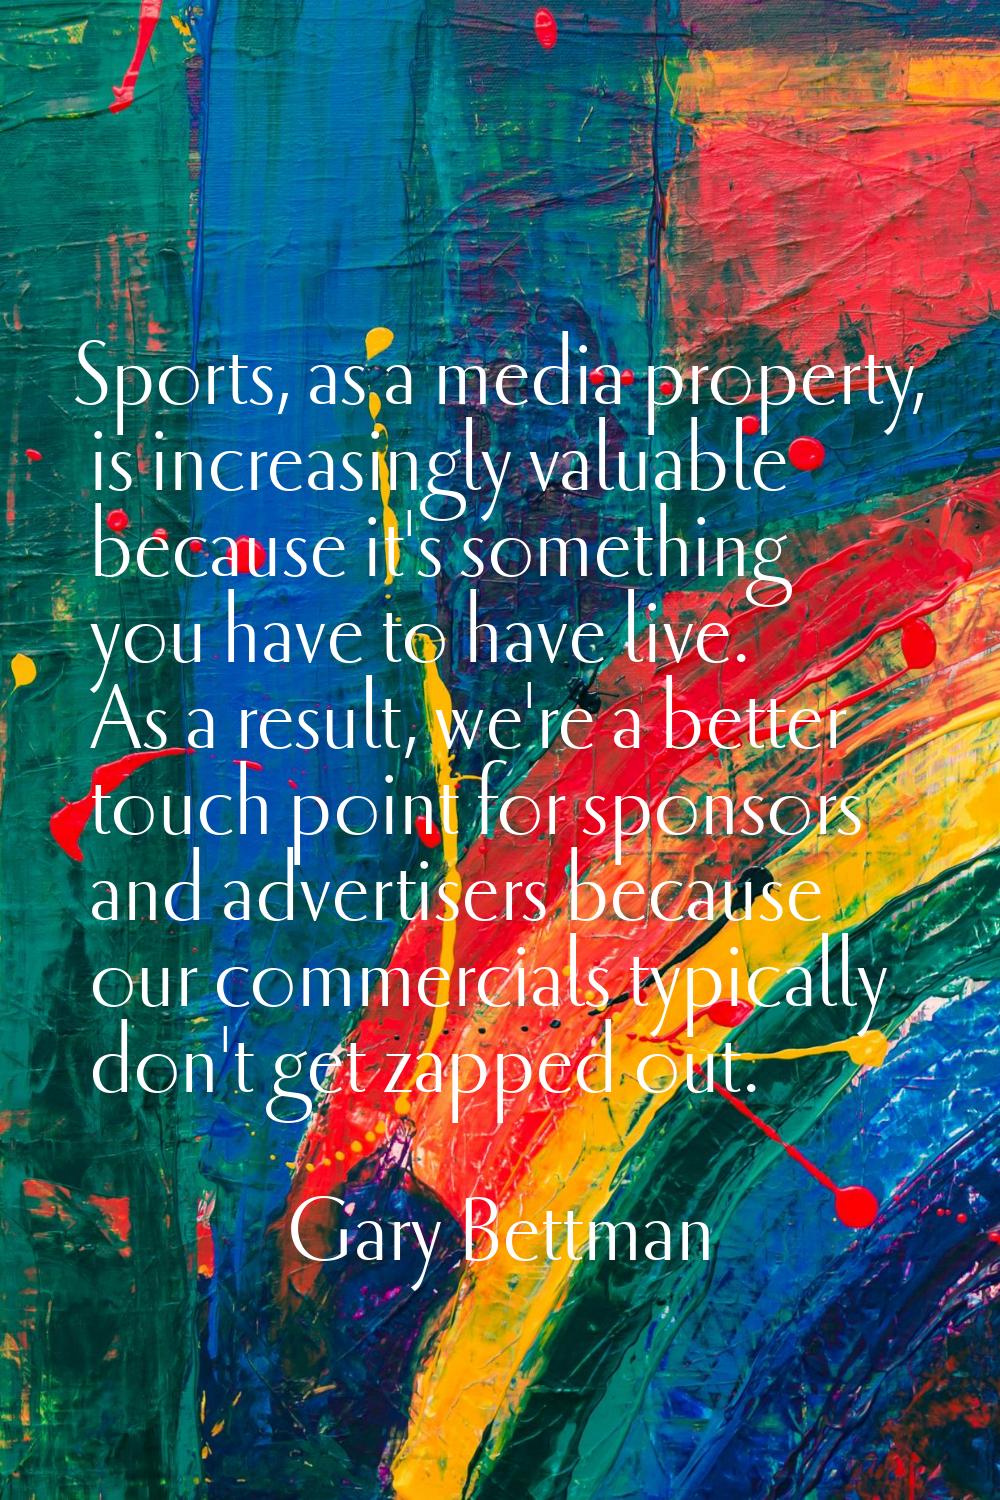 Sports, as a media property, is increasingly valuable because it's something you have to have live.